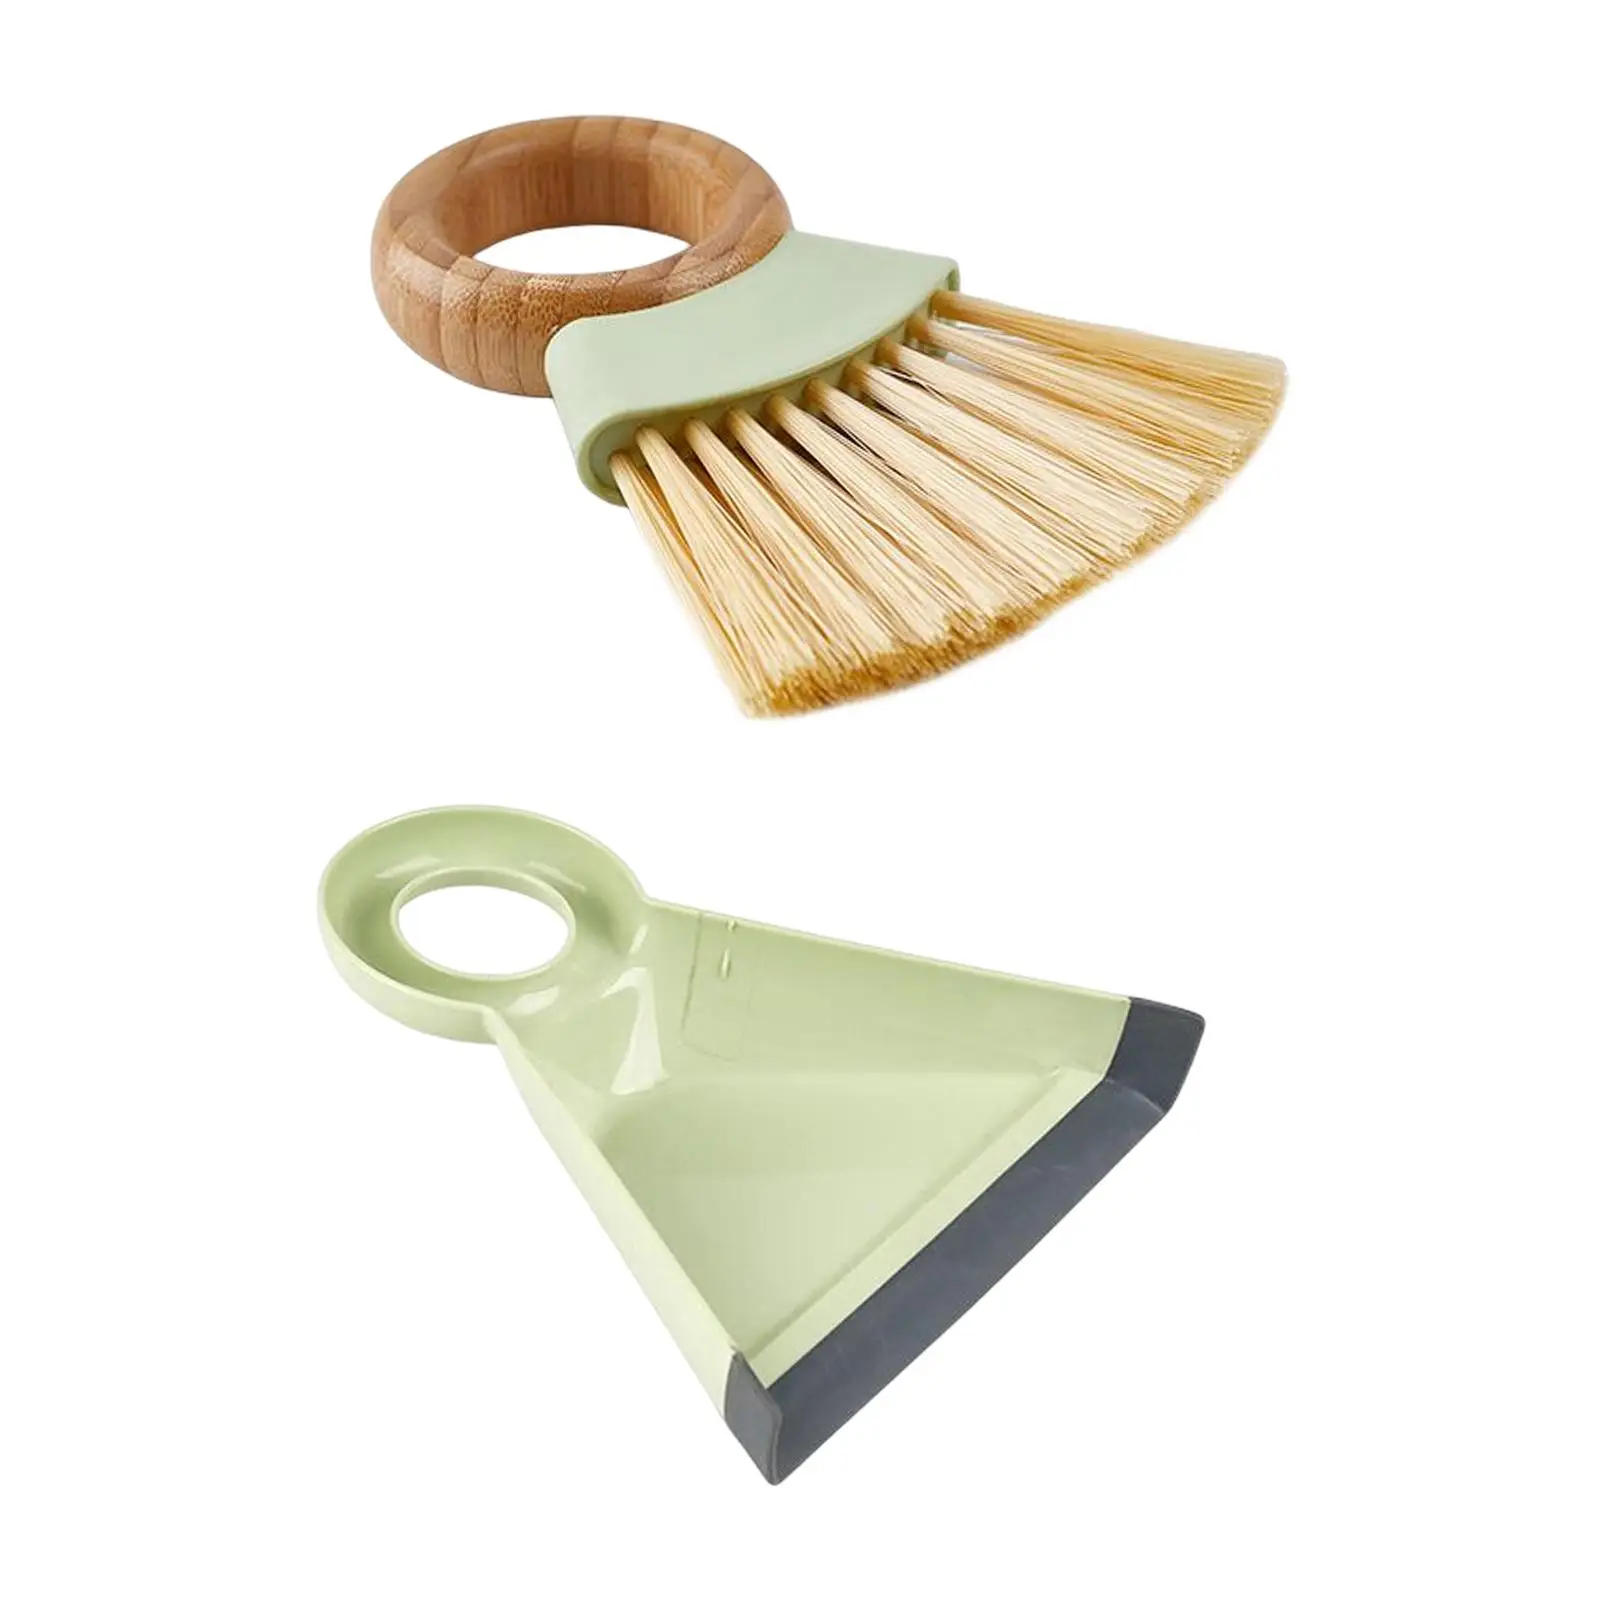 Small Broom and Dustpan Set Handheld Dustpan Brush Broom Cleaning Brush for Cabinet Office Kitchen Countertop Dining Table Sofa